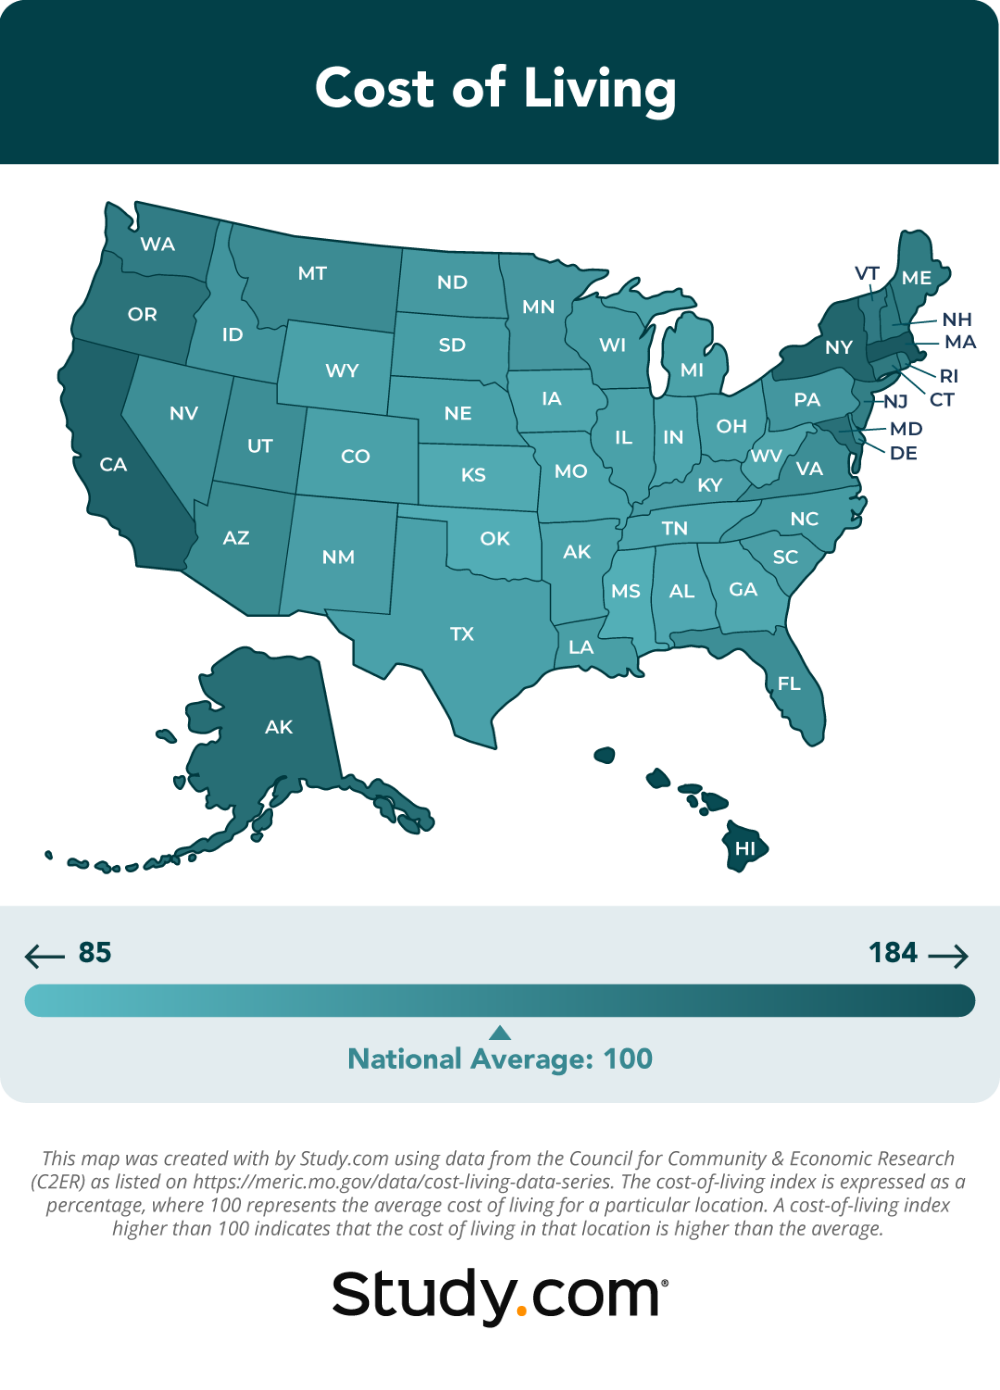 A heat map of the U.S. showing the cost of living in each state.